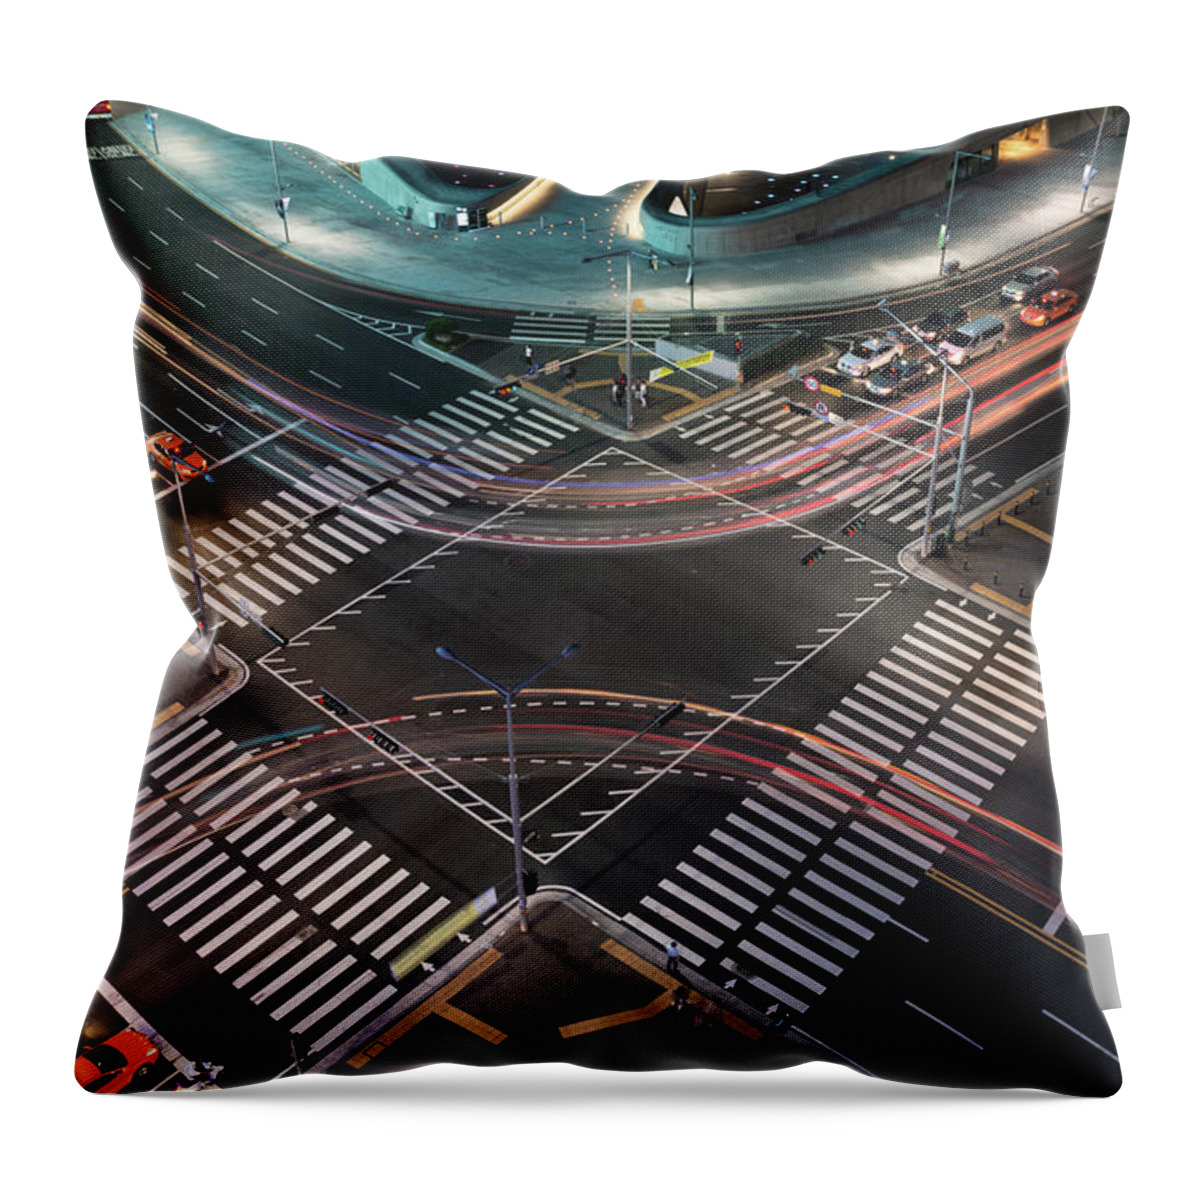 Curve Throw Pillow featuring the photograph Curve Trail At Junction Seoul by Natthawat